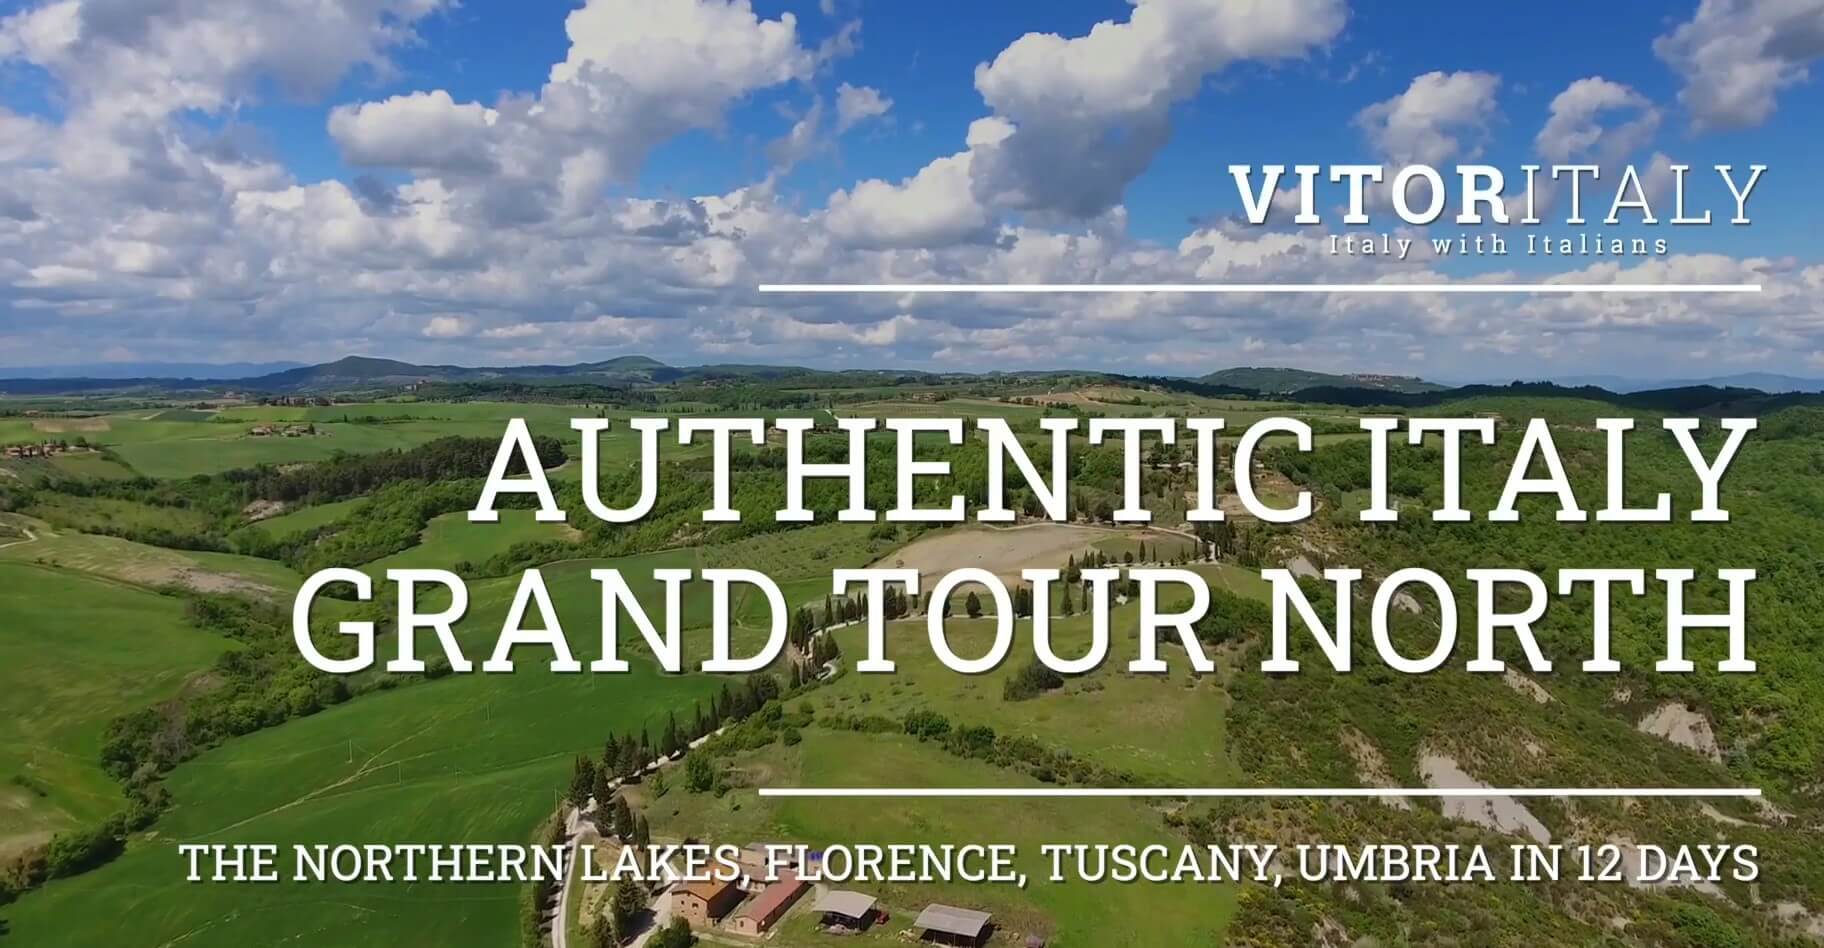 AUTHENTIC ITALY GRAND TOUR NORTH - The Northern Lakes, Emilia, Florence, Tuscany, Umbria in 12 days